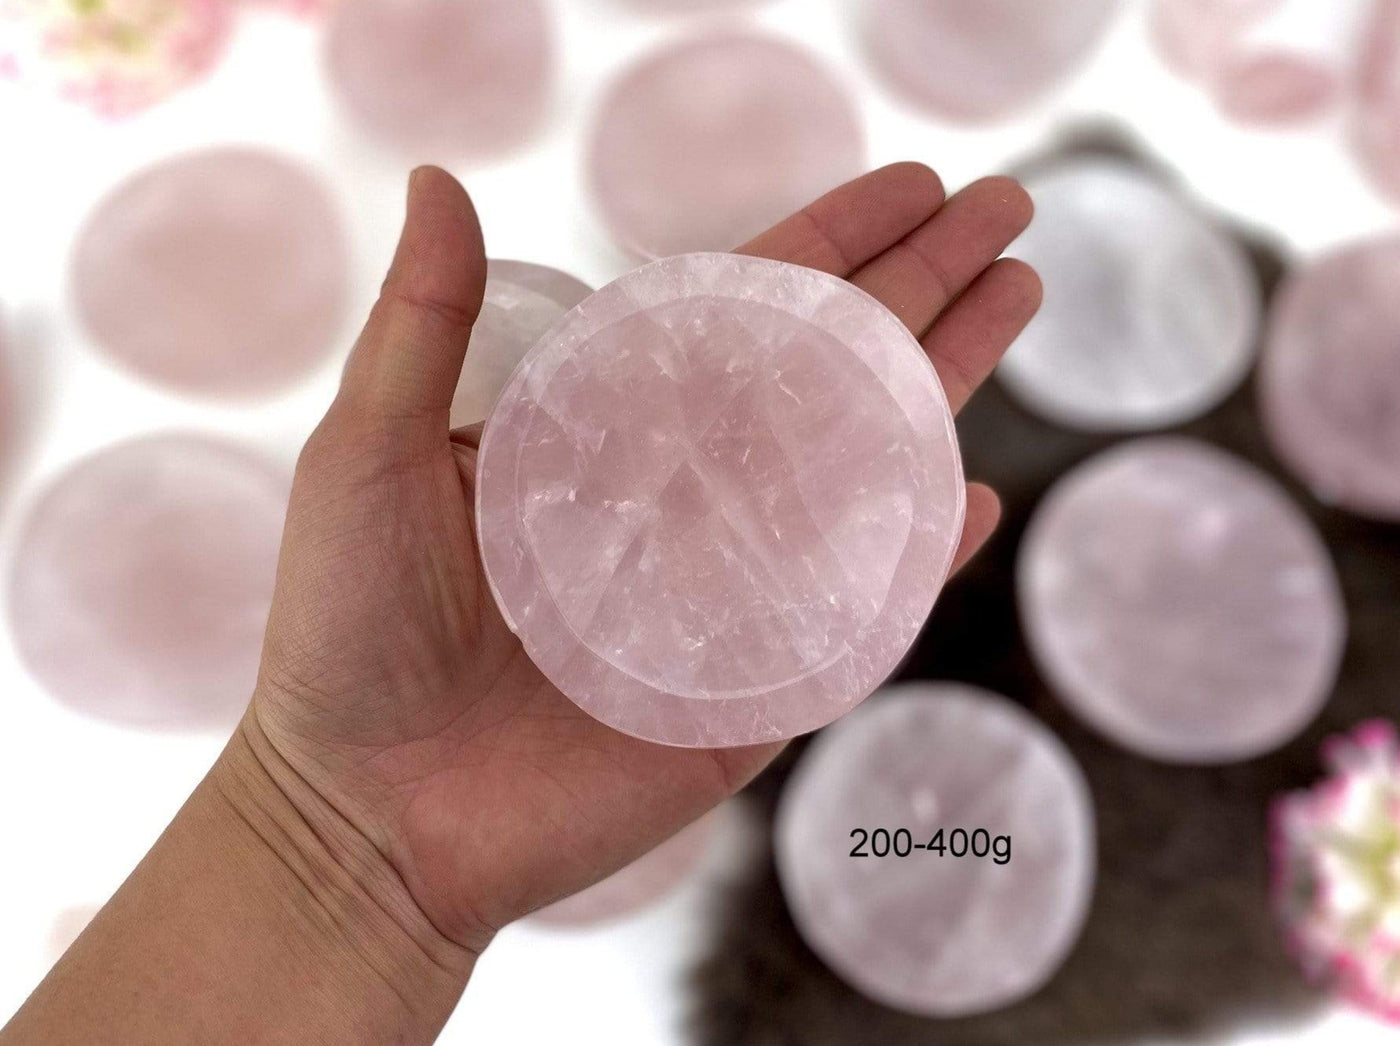 Hand holding up 200-400g Rose Quartz Stone Round Dish with others blurred in the background